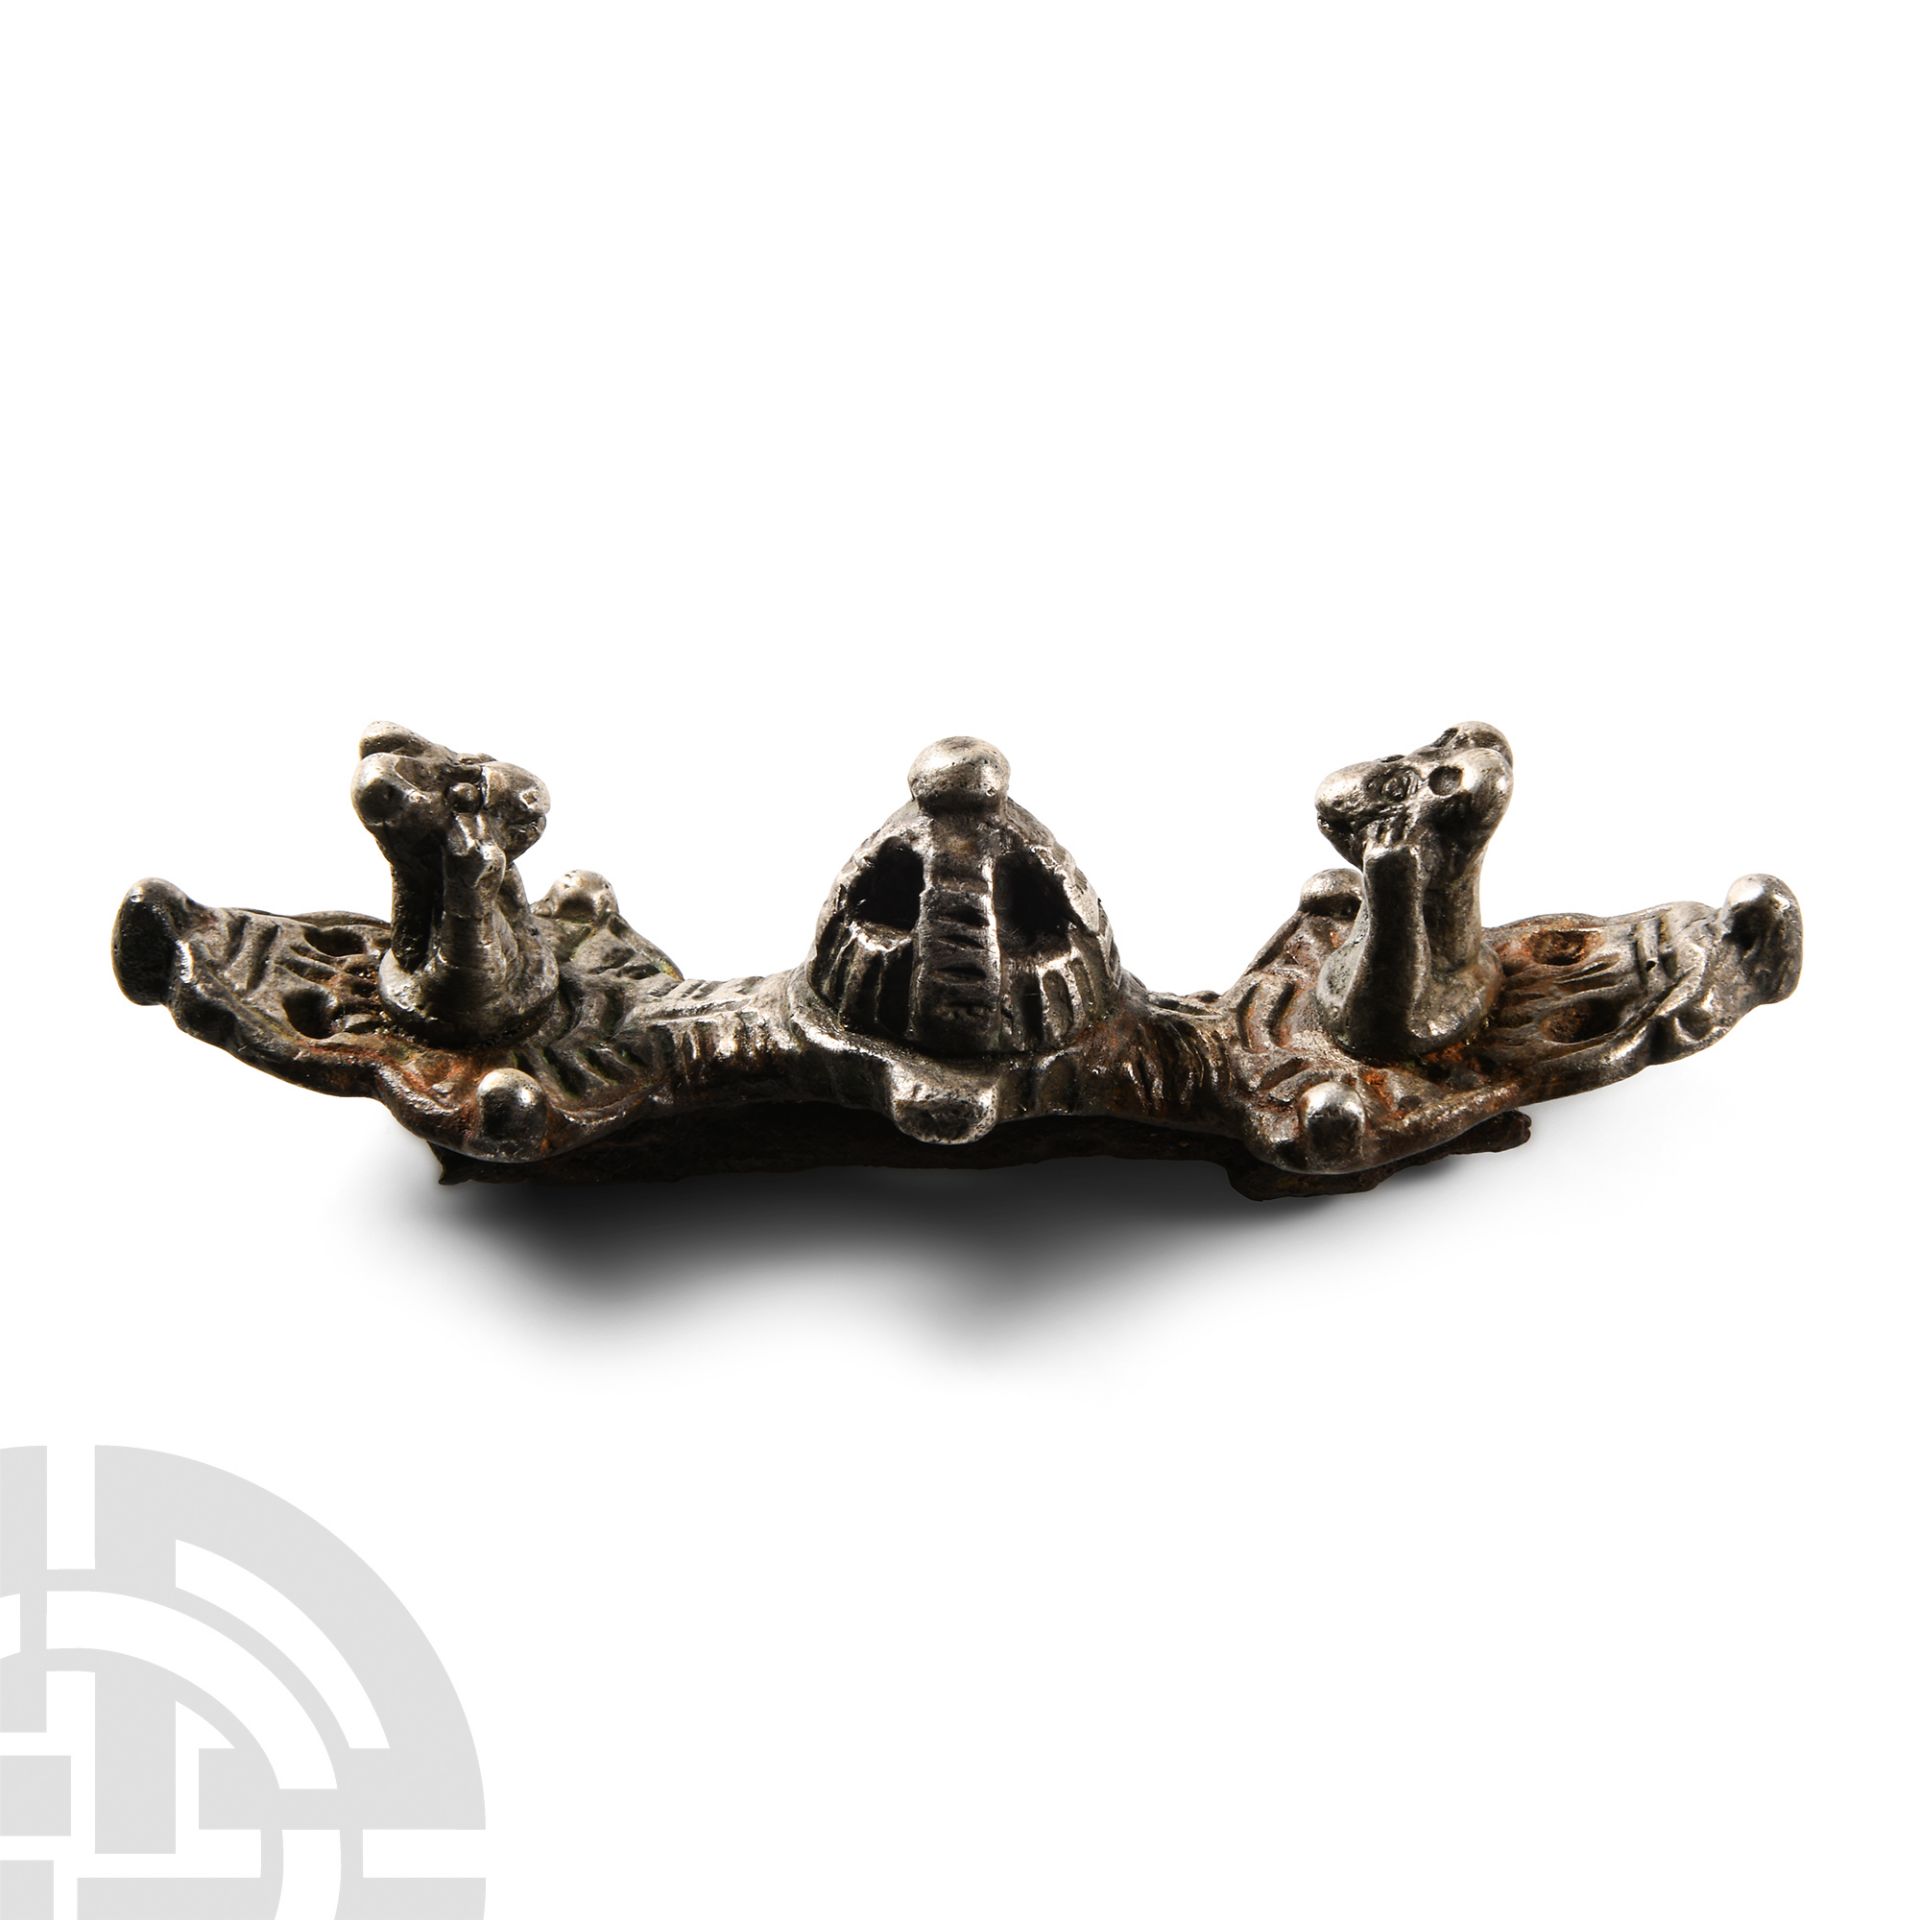 Scandinavian Viking Silver Equal-Arm Brooch with Animals - Image 2 of 2